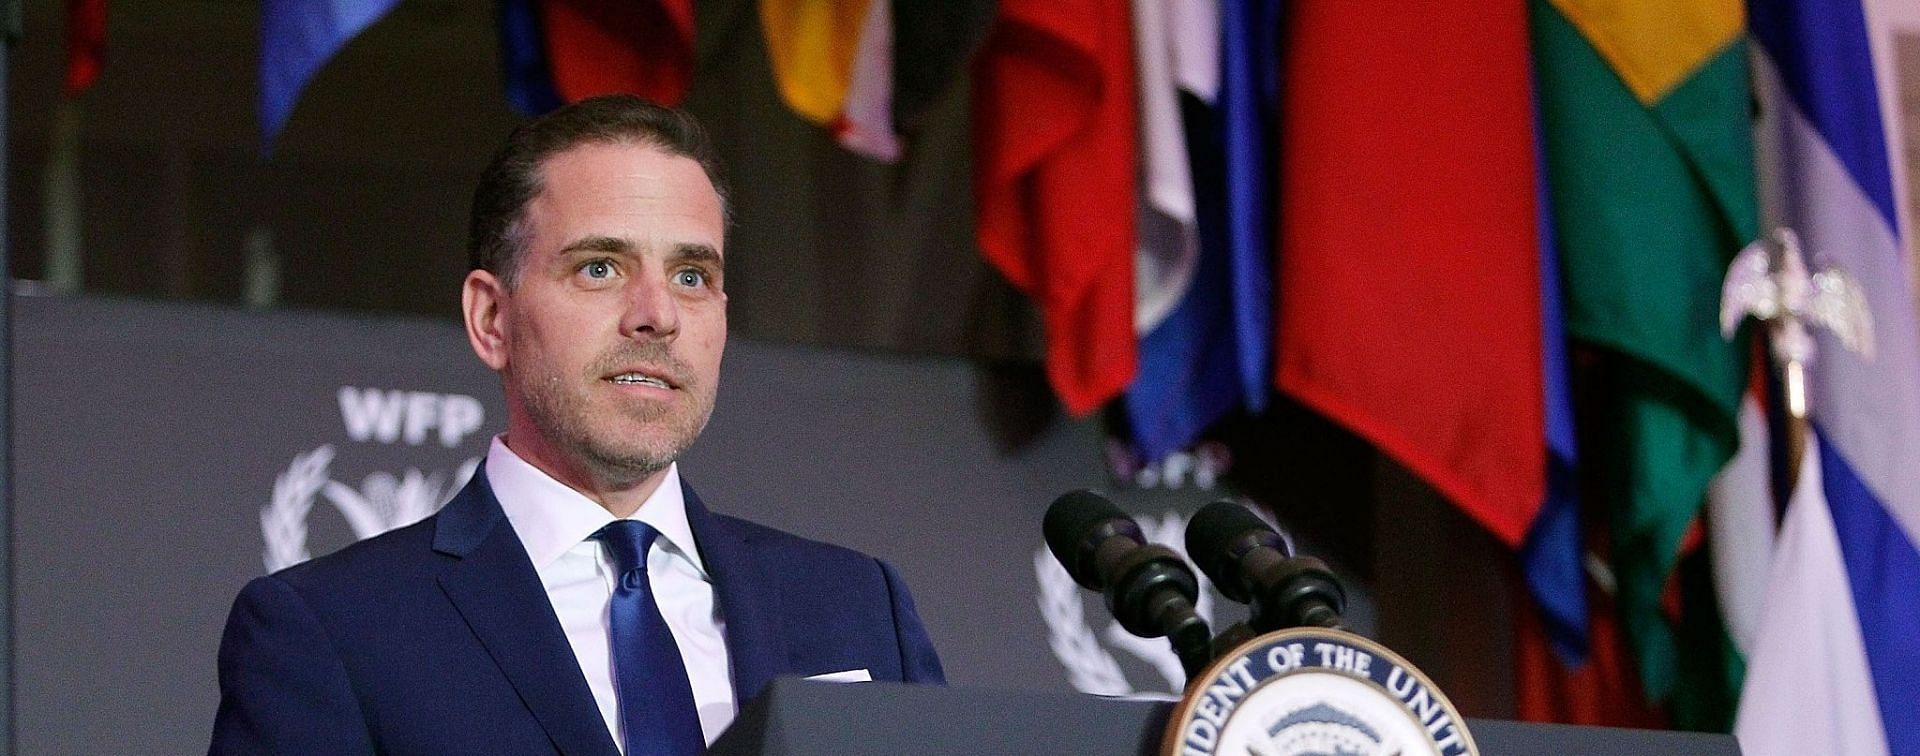 Controversial Hunter Biden action figurine is being sold online at Swamp Prince (Image via Paul Morigi/Getty Images